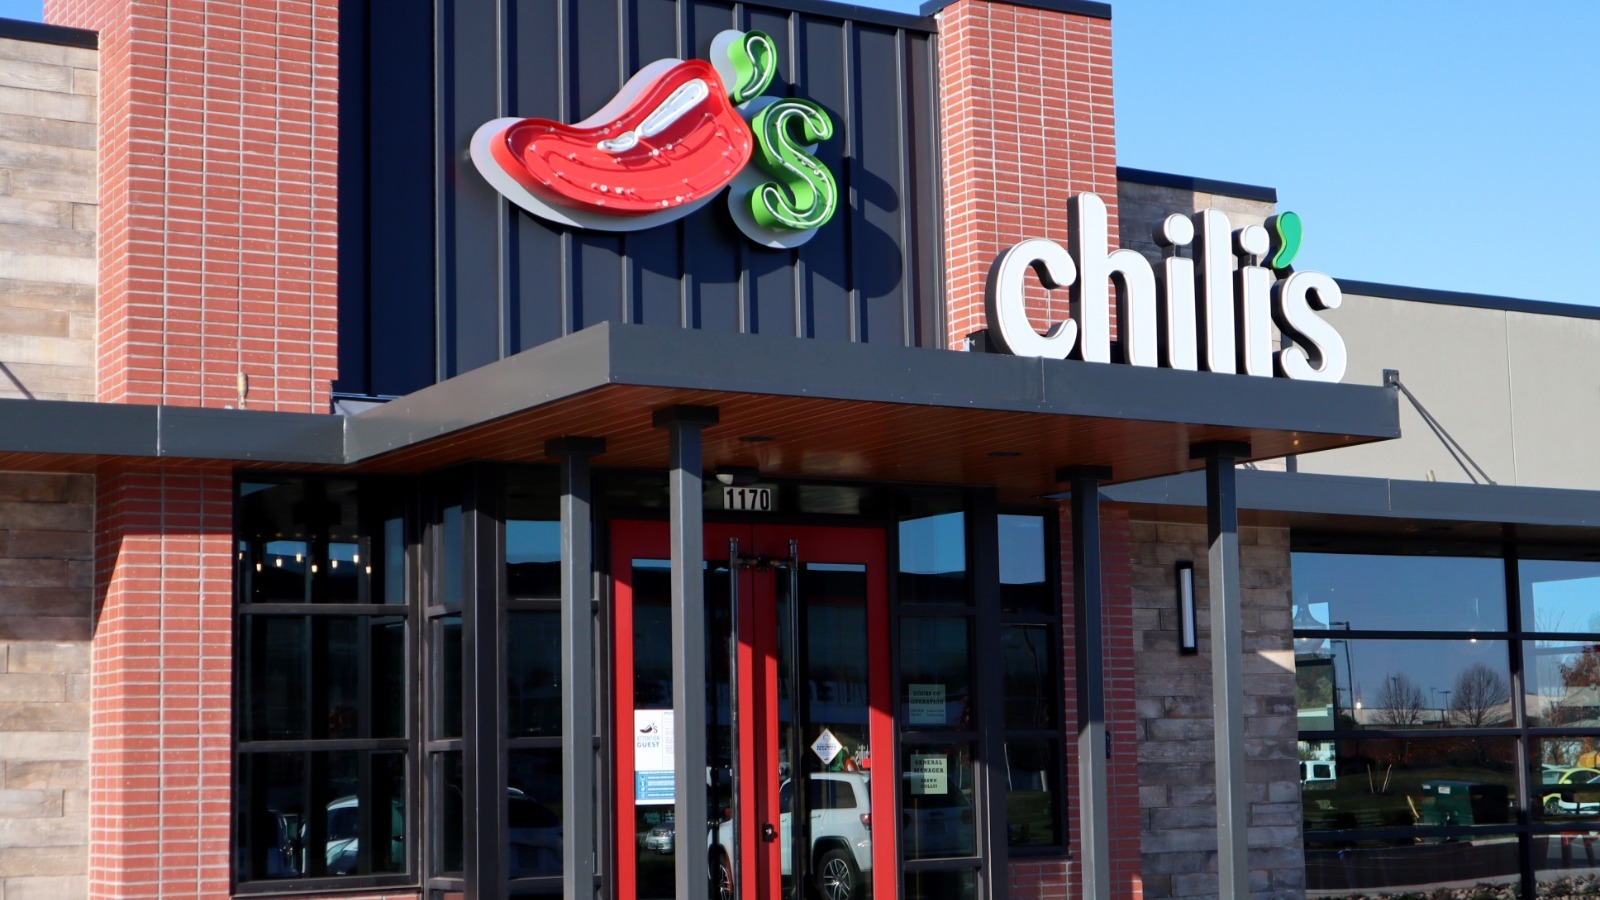 The Truth About How Chili's Got Its Name